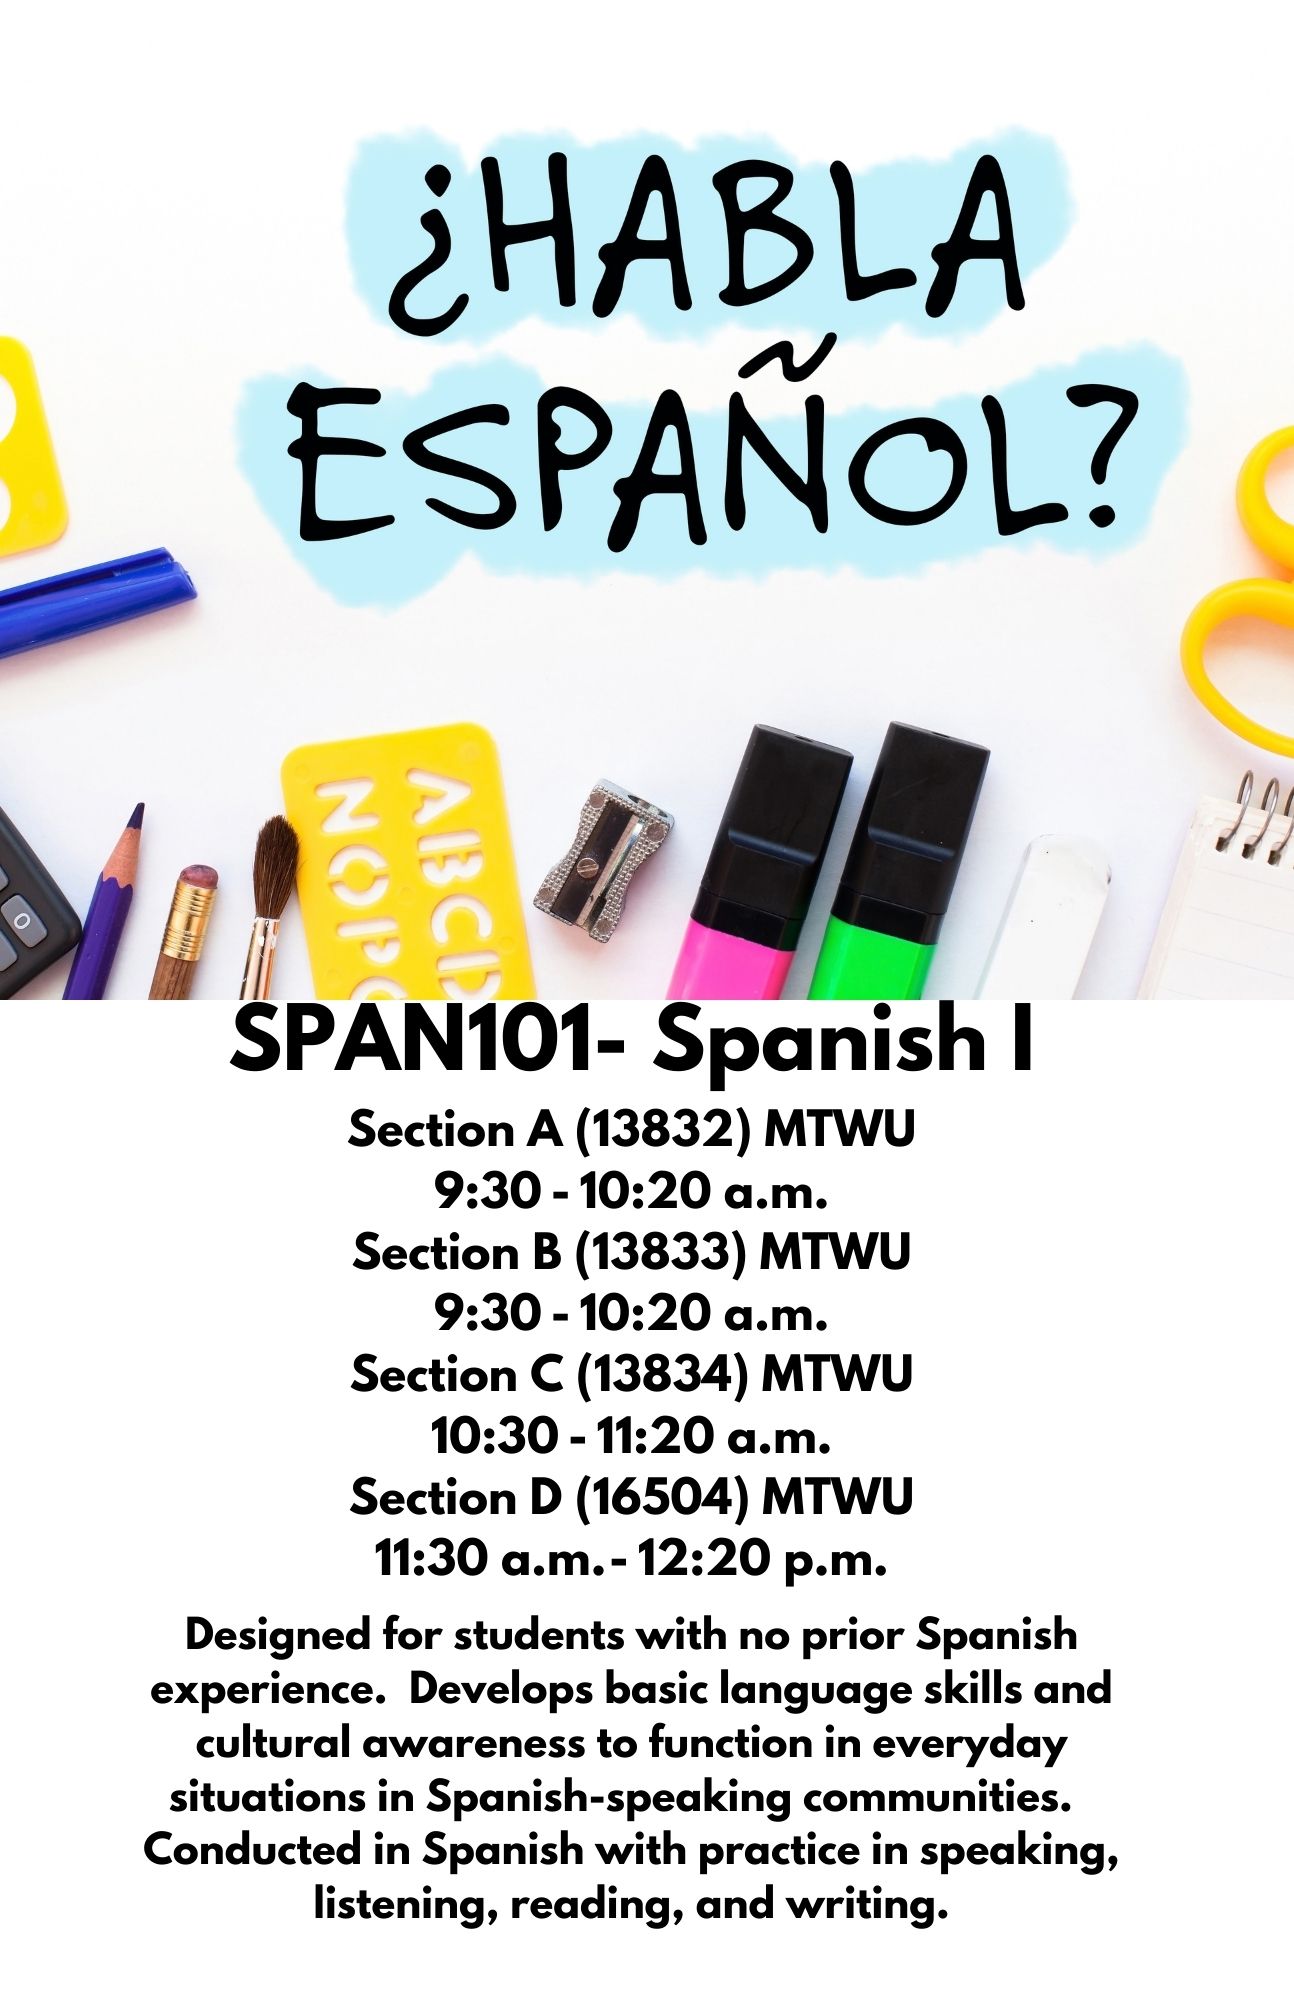 SPAN101- Spanish I Section A (13832) MTWU 9:30 - 10:20 a.m. Section B (13833) MTWU 9:30 - 10:20 a.m. Section C (13834) MTWU 10:30 - 11:20 a.m. Section D (16504) MTWU 11:30 a.m. - 12:20 p.m. Designed for students with no prior Spanish experience.  Develops basic language skills and cultural awareness to function in everyday situations in Spanish-speaking communities.  Conducted in Spanish with practice in speaking, listening, reading, and writing.